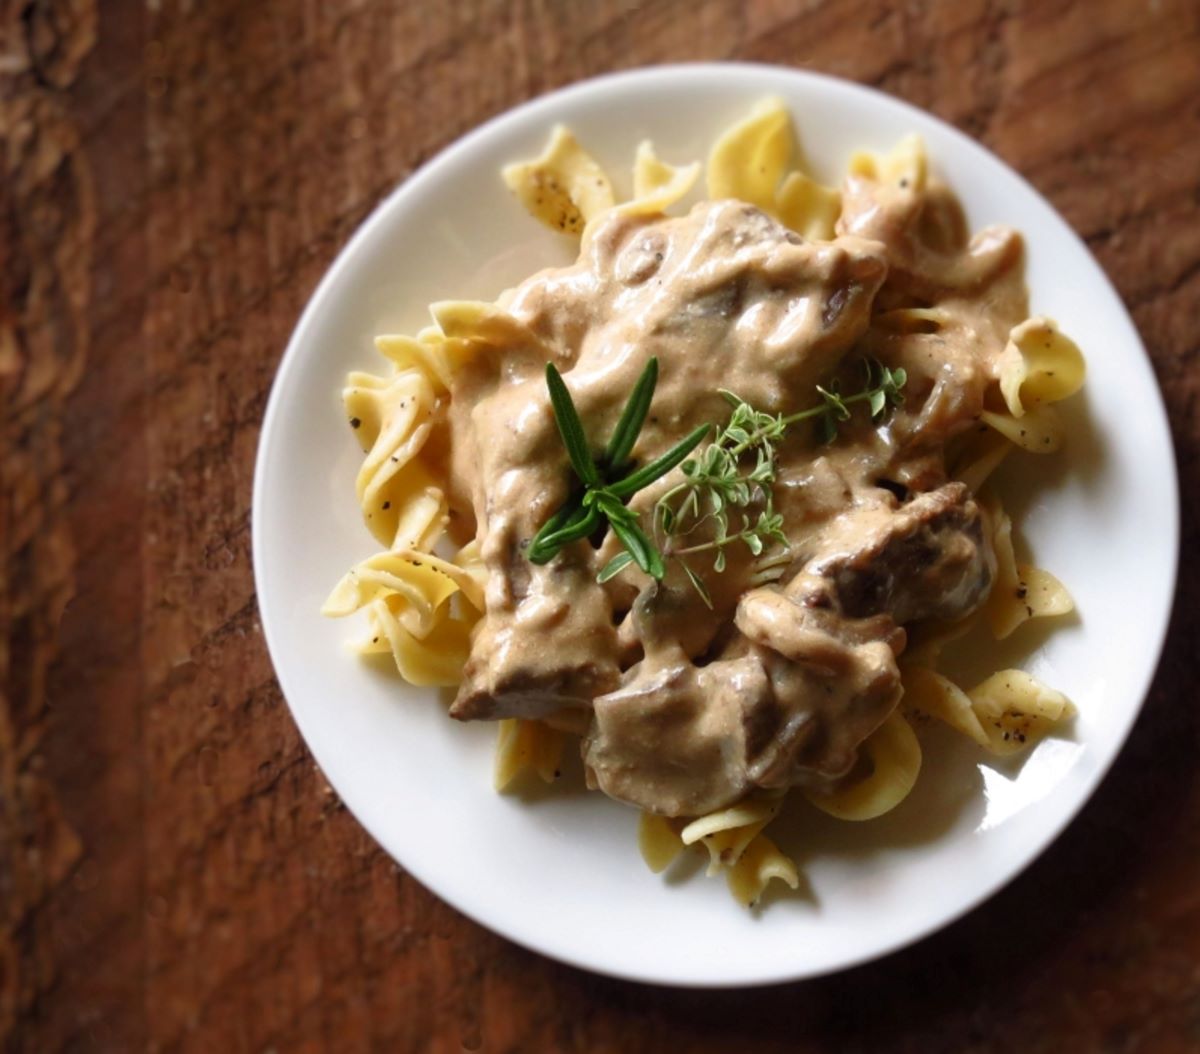 Beef stroganoff over a plate of noodles.